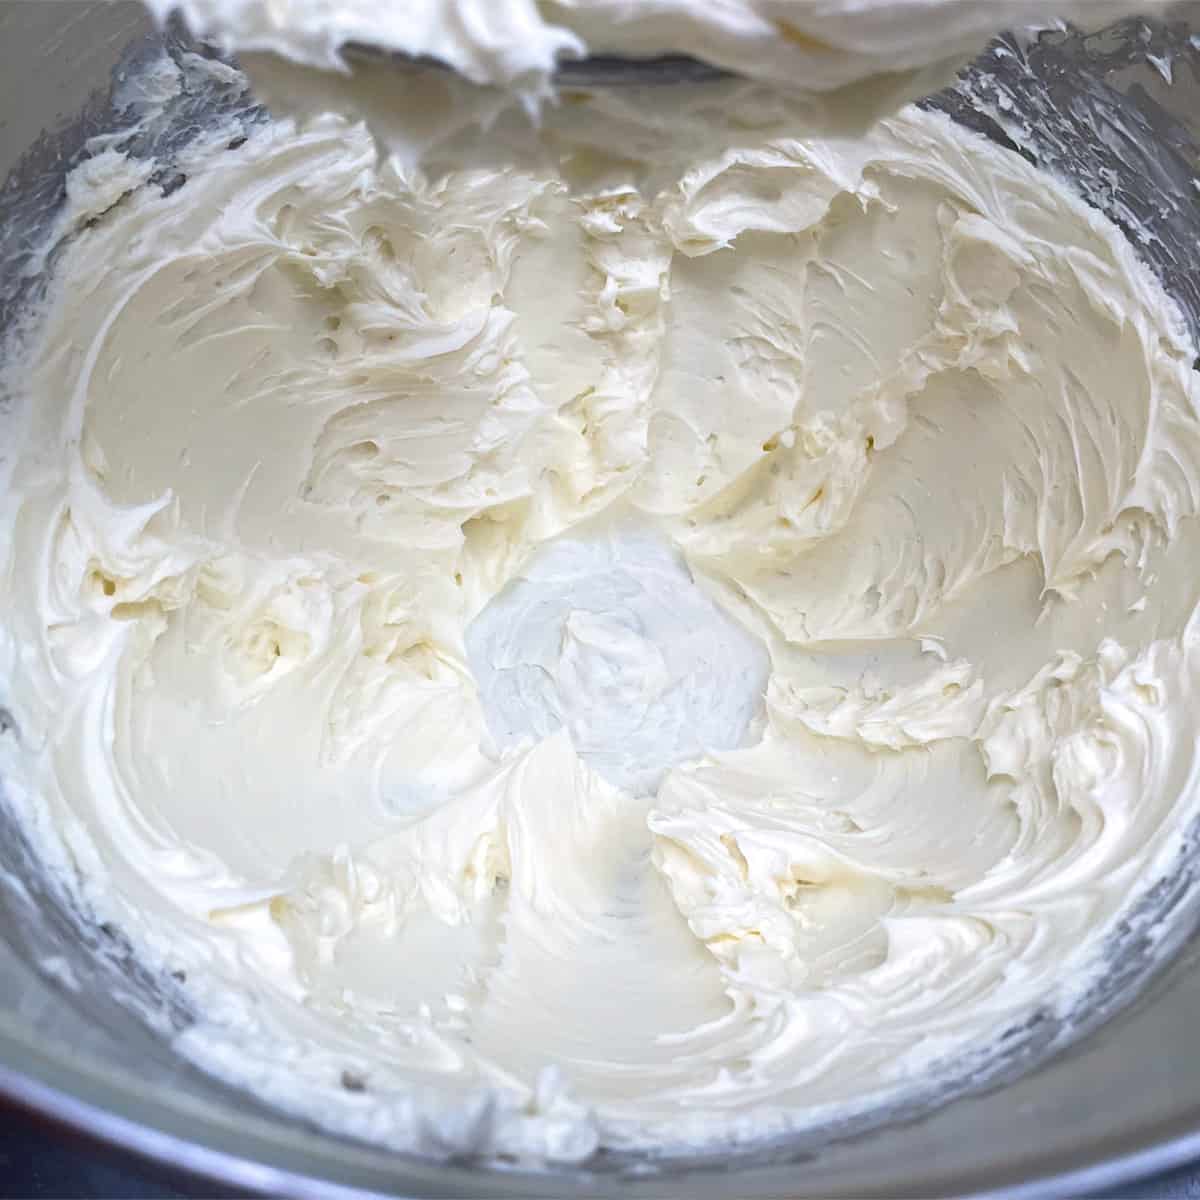 Cream cheese and sugar softly whipped to start the mixing of the cheesecake.